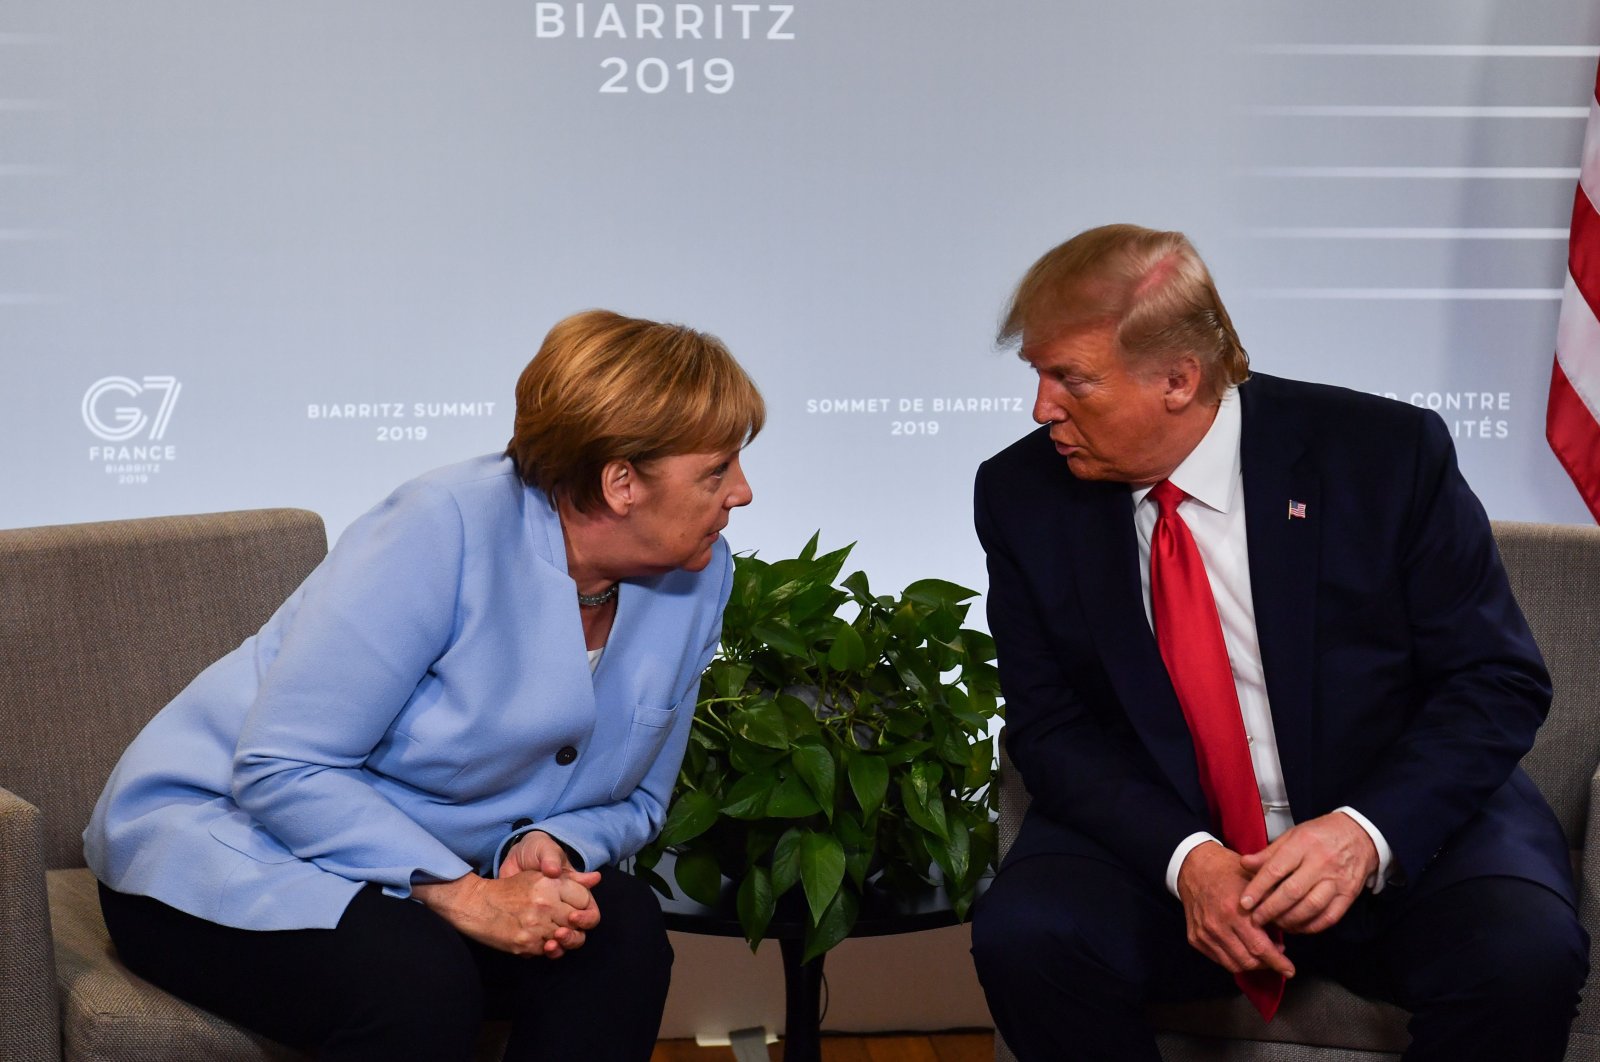 German Chancellor Angela Merkel (L) and U.S. President Donald Trump speak during a bilateral meeting on the sidelines of a Group of Seven summit in Biarritz, southwestern France, Aug. 26, 2019. (AFP Photo)